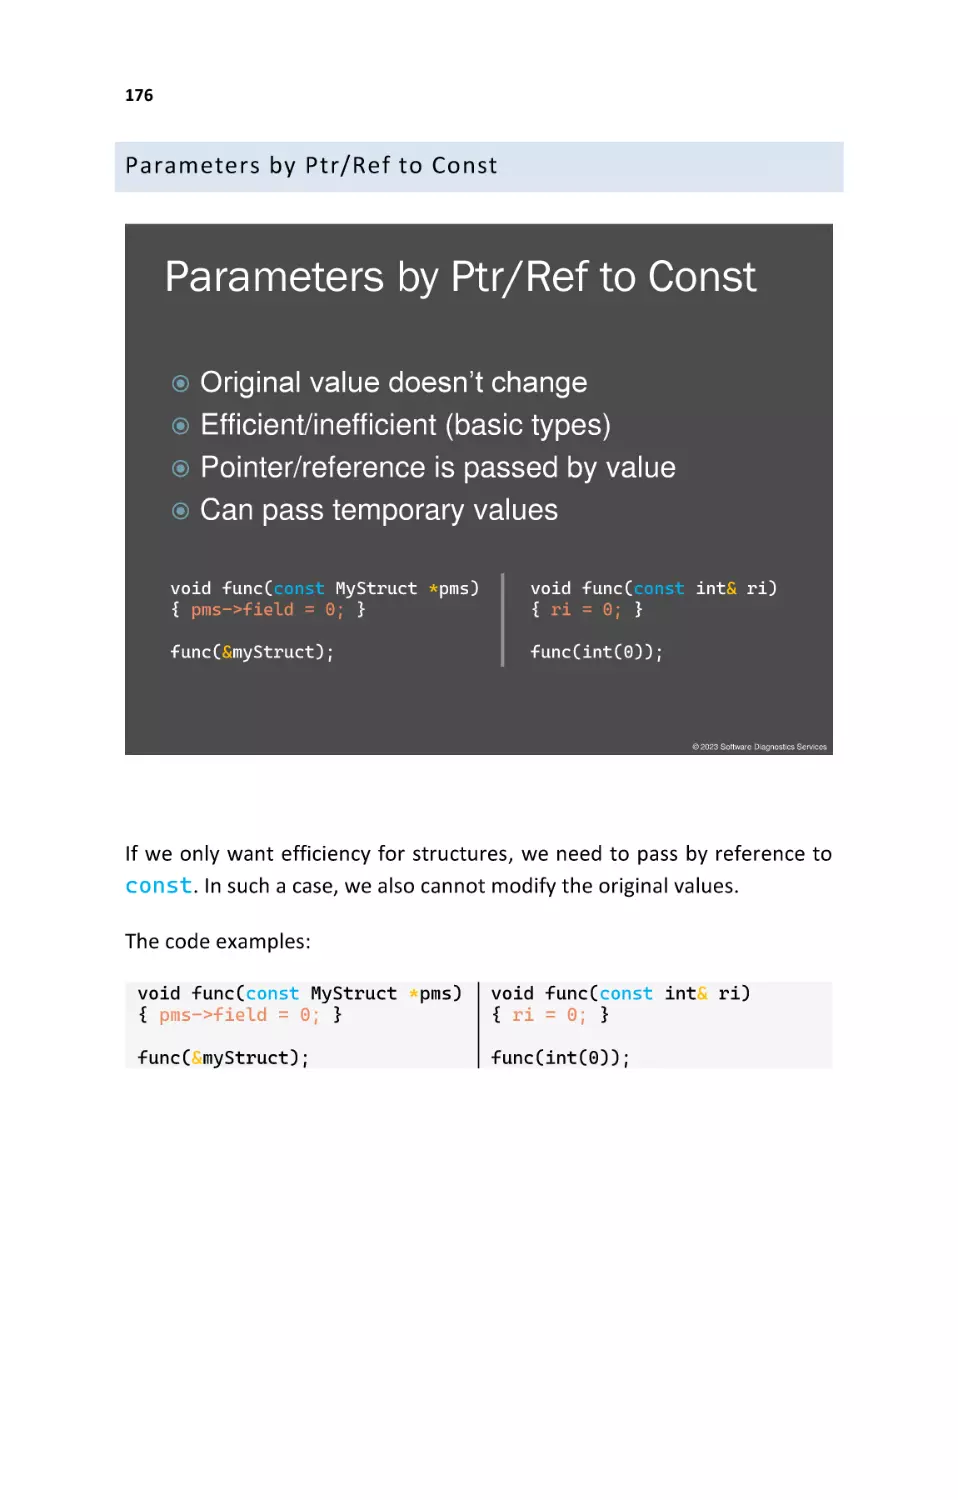 Parameters by Ptr/Ref to Const